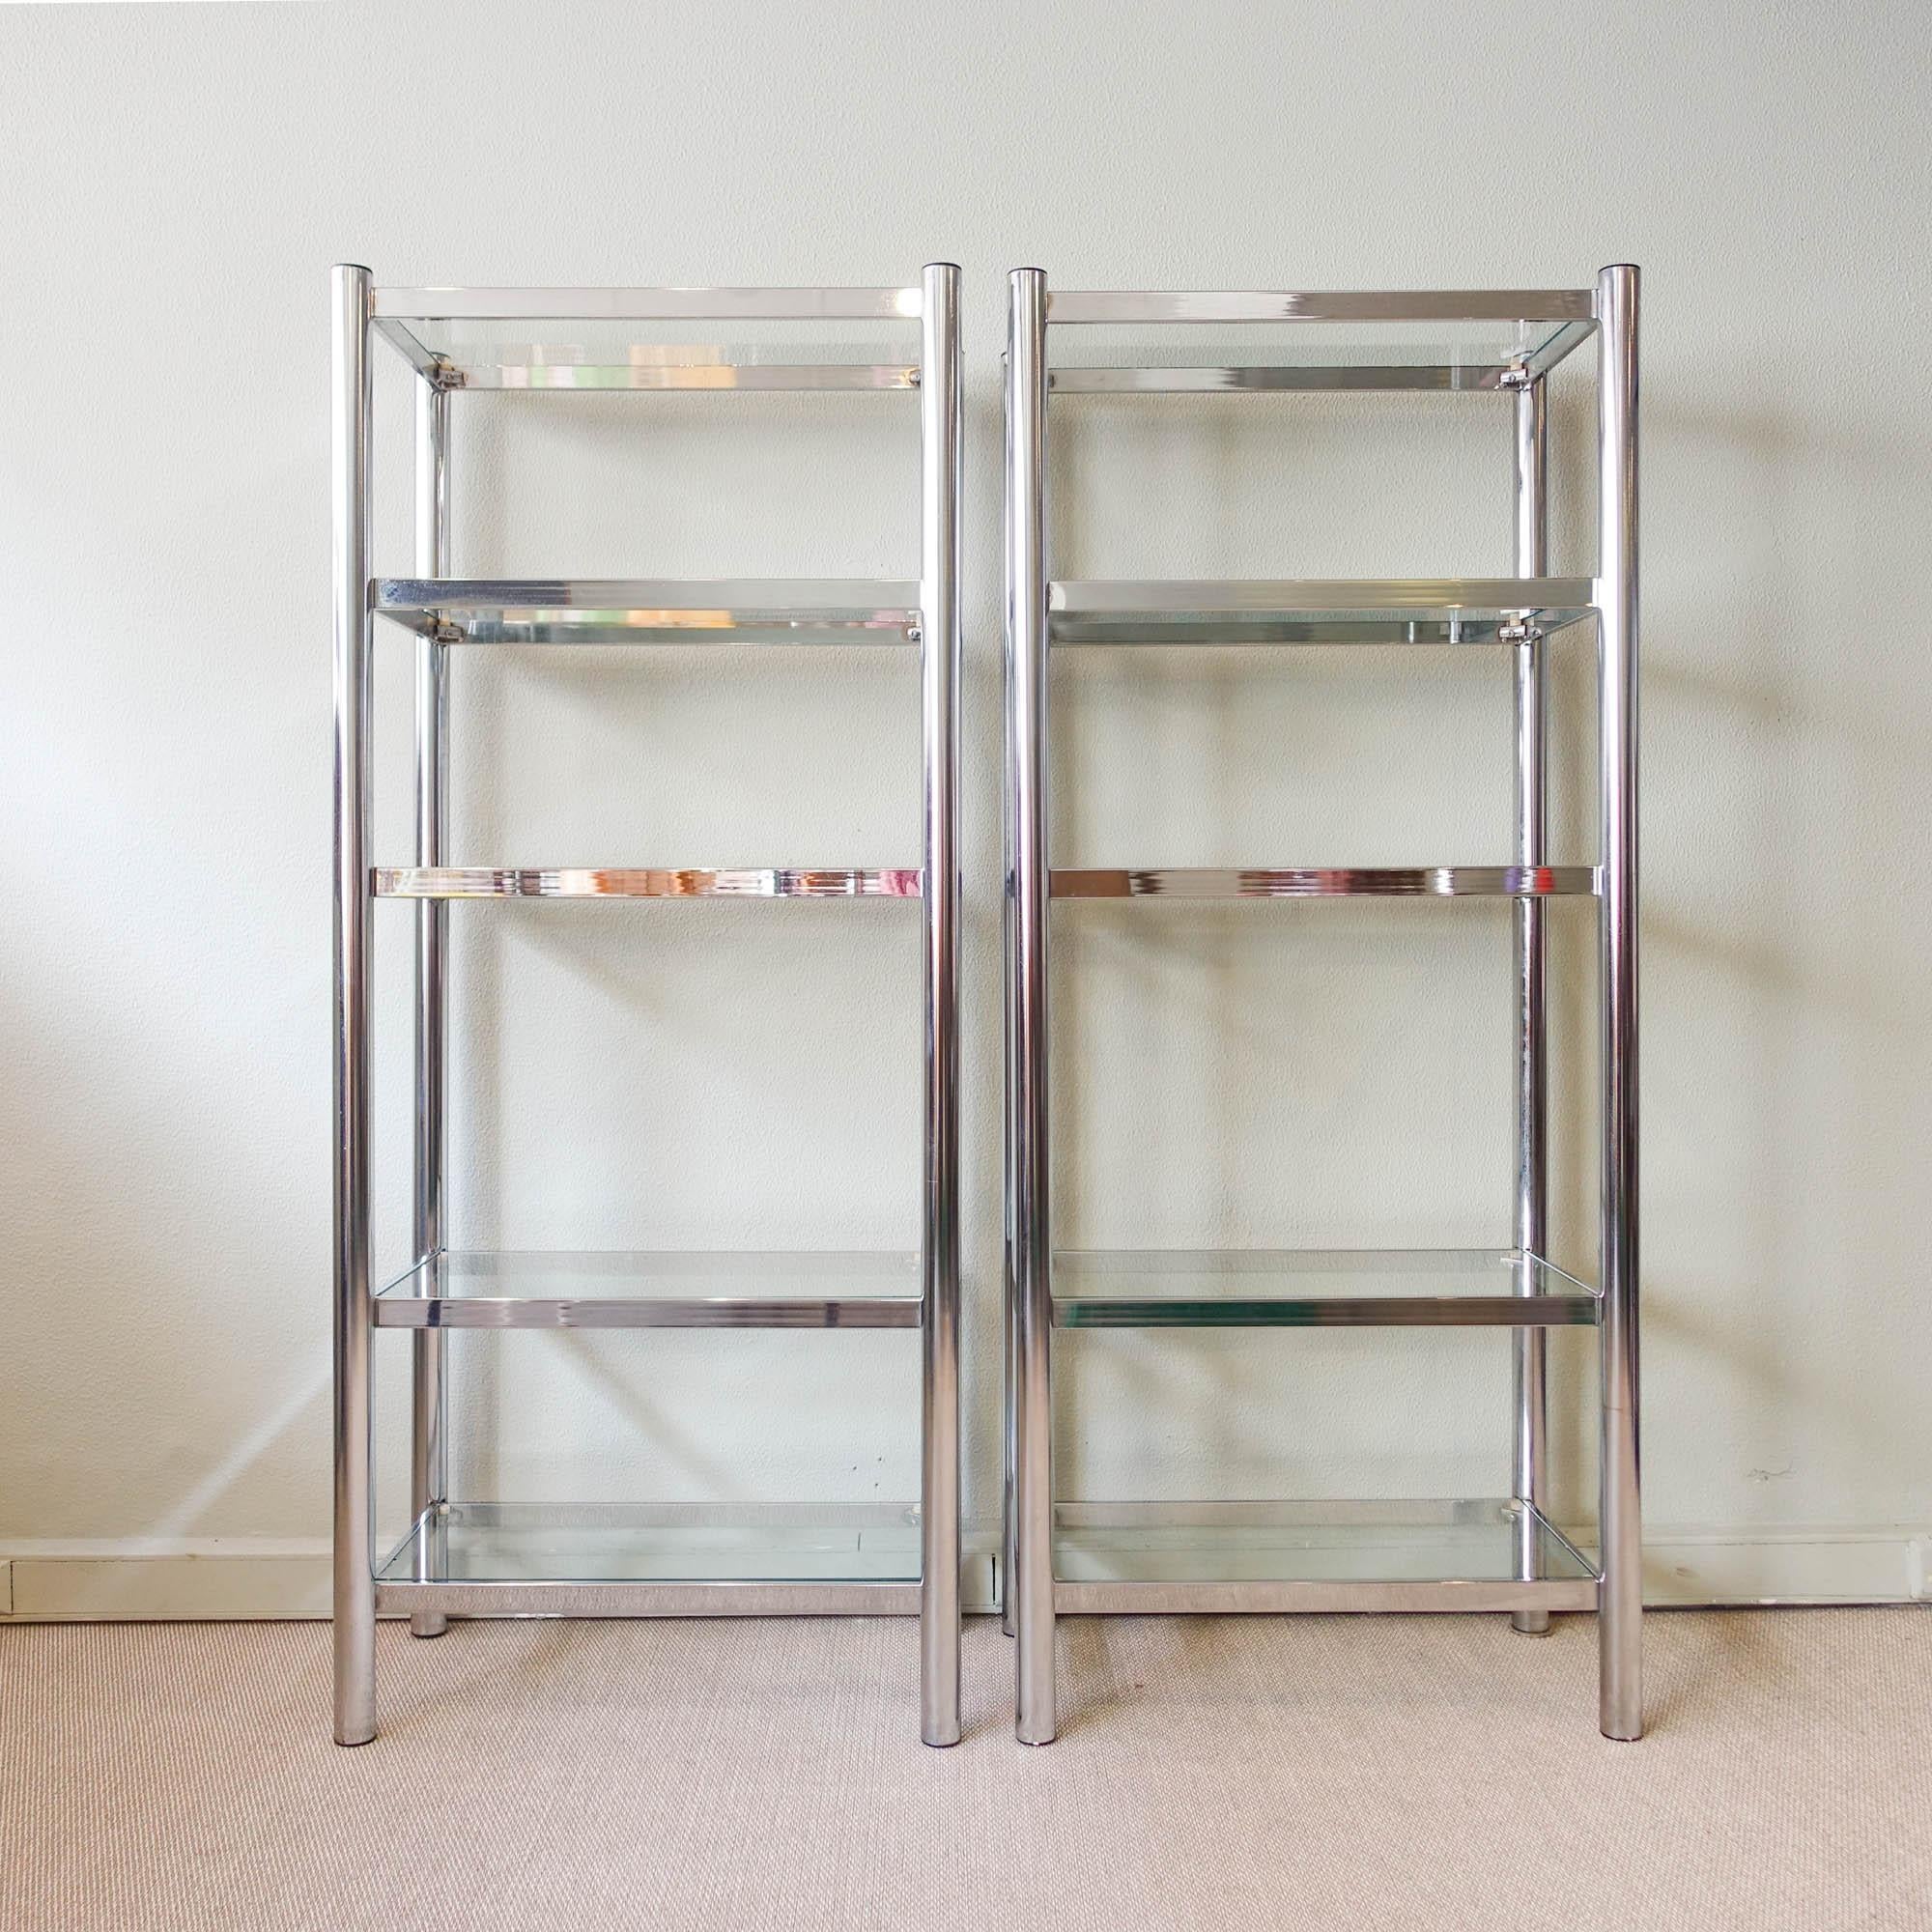 This gorgeous pair of polished chrome and glass shelving unit is a must-have for any vintage lover! Produced in Portugal during the 1970s, they feature a simple yet functional design that is perfect for displaying your favorite books and objects.